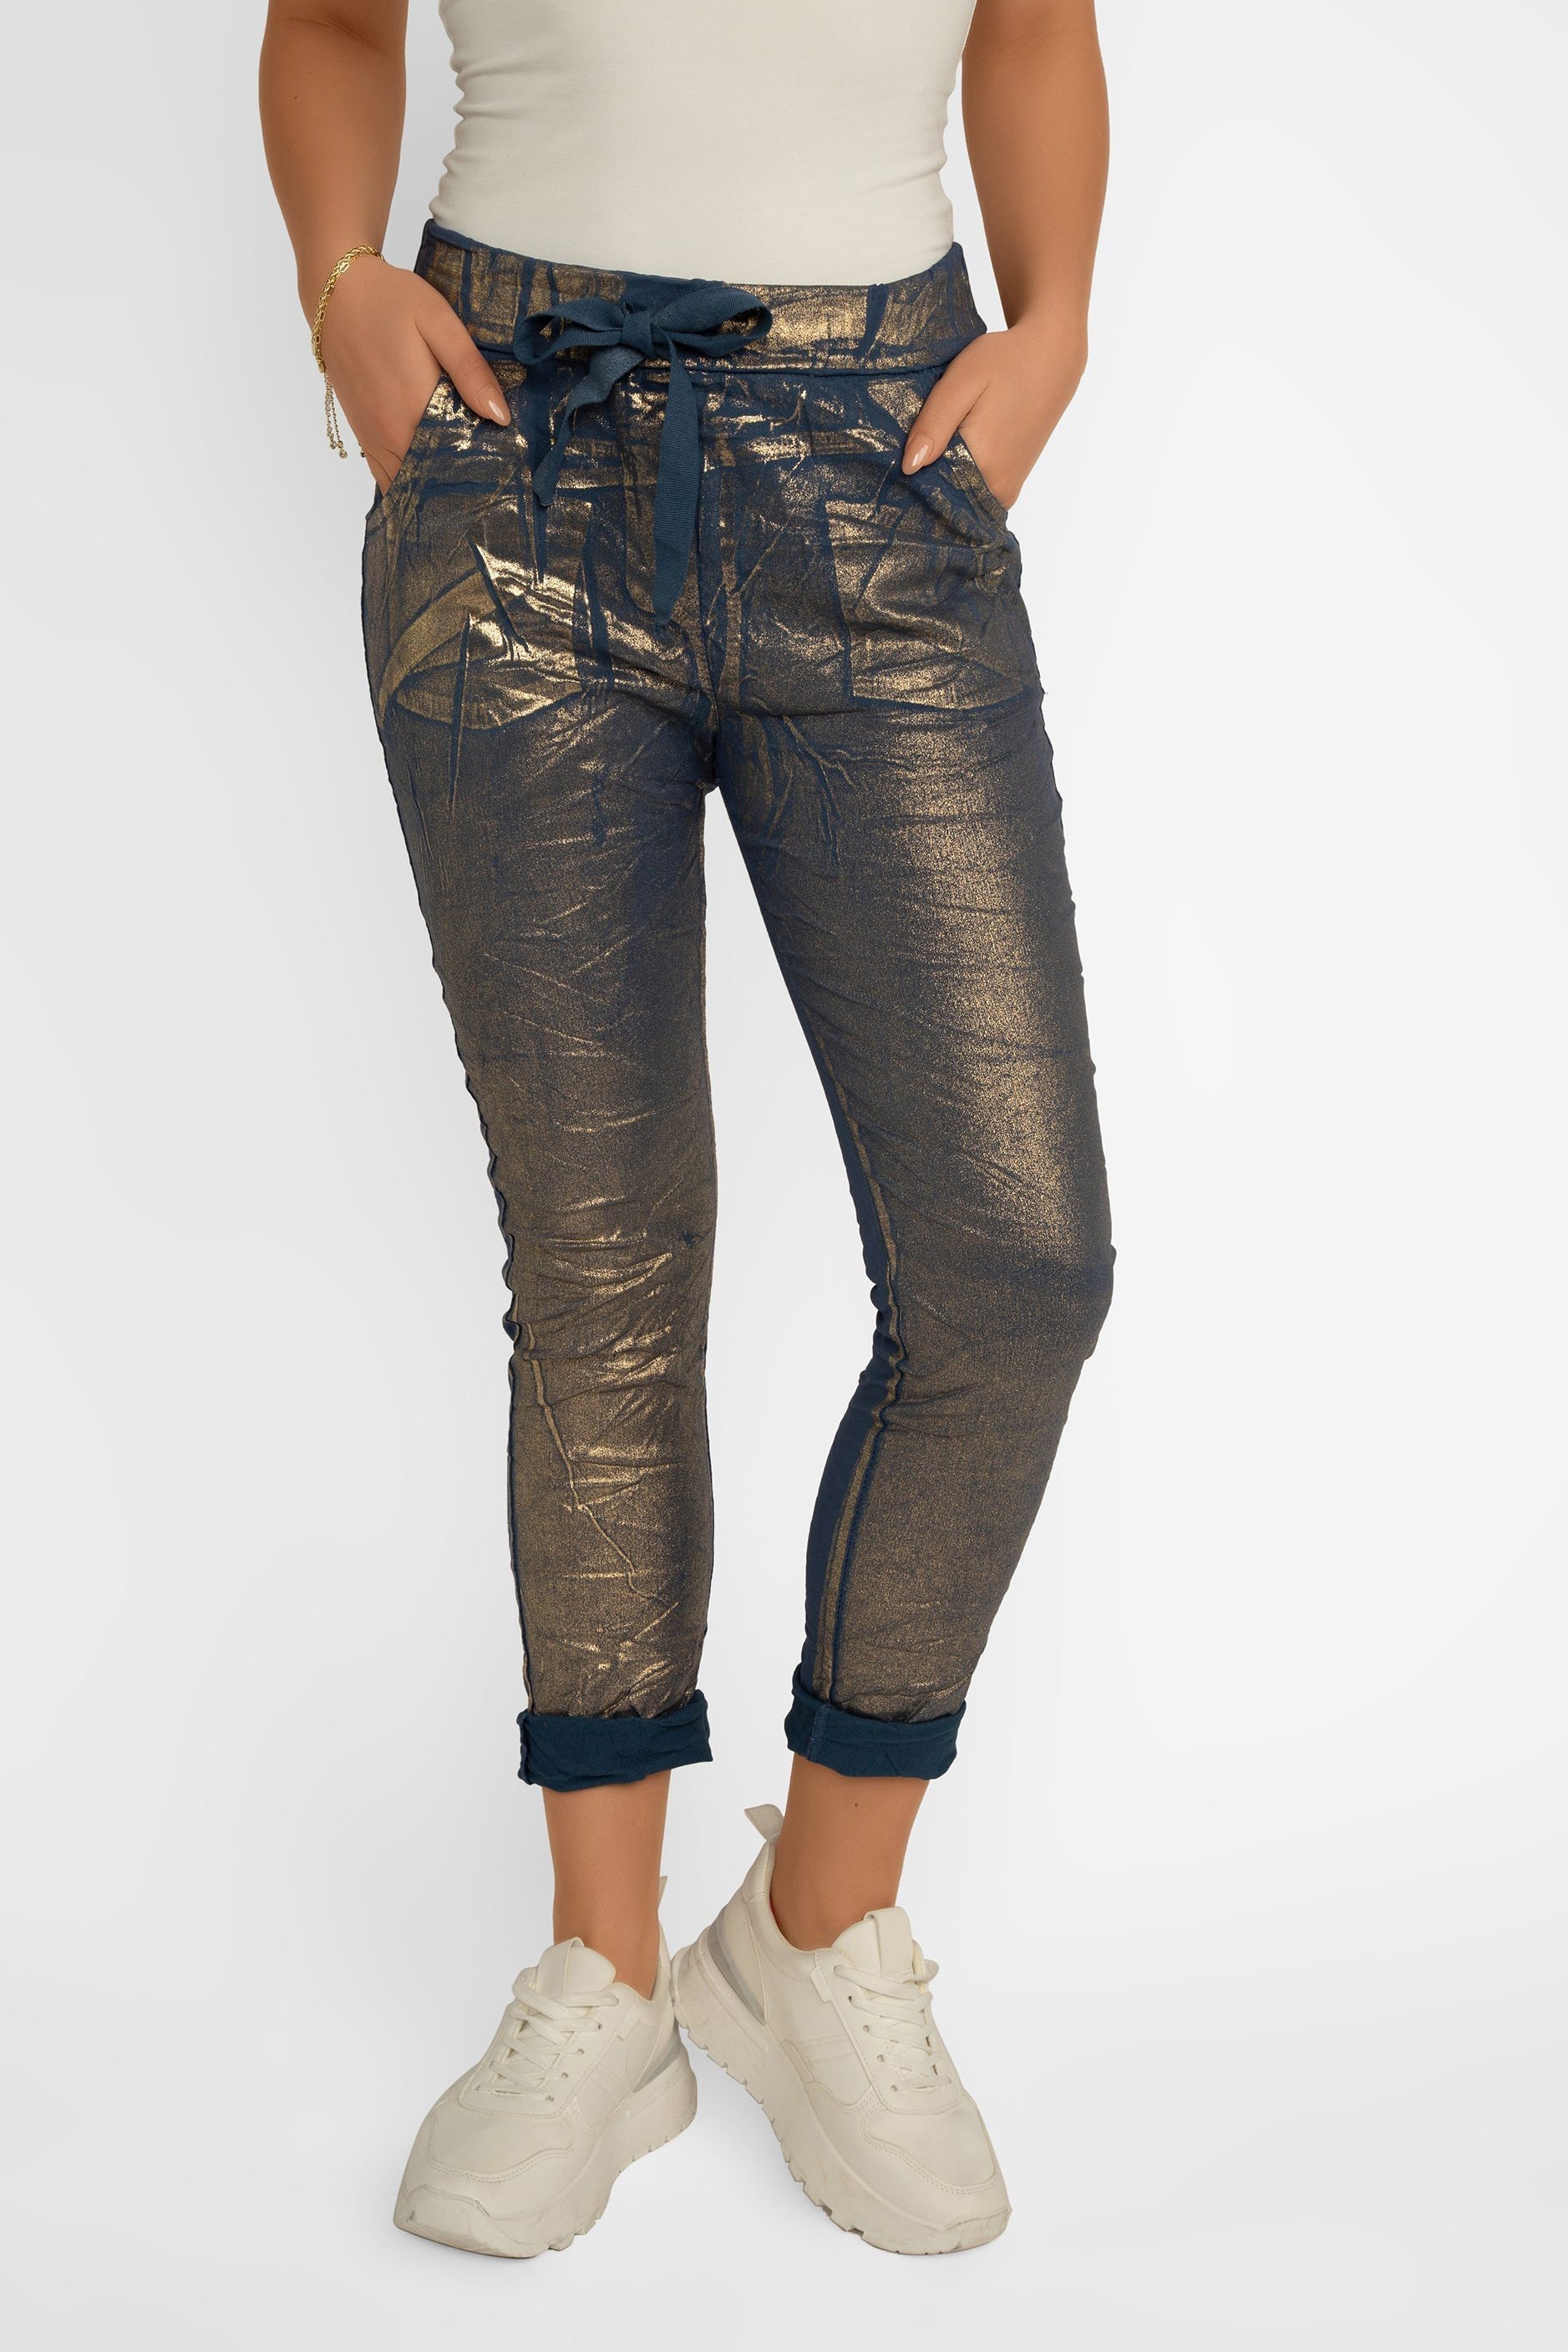 Front view of Bell Amore (21258) Women's Cropped Slim Fit, Metallic Coated Pull On Pants with Pockets in Navy Blue with Gold foil